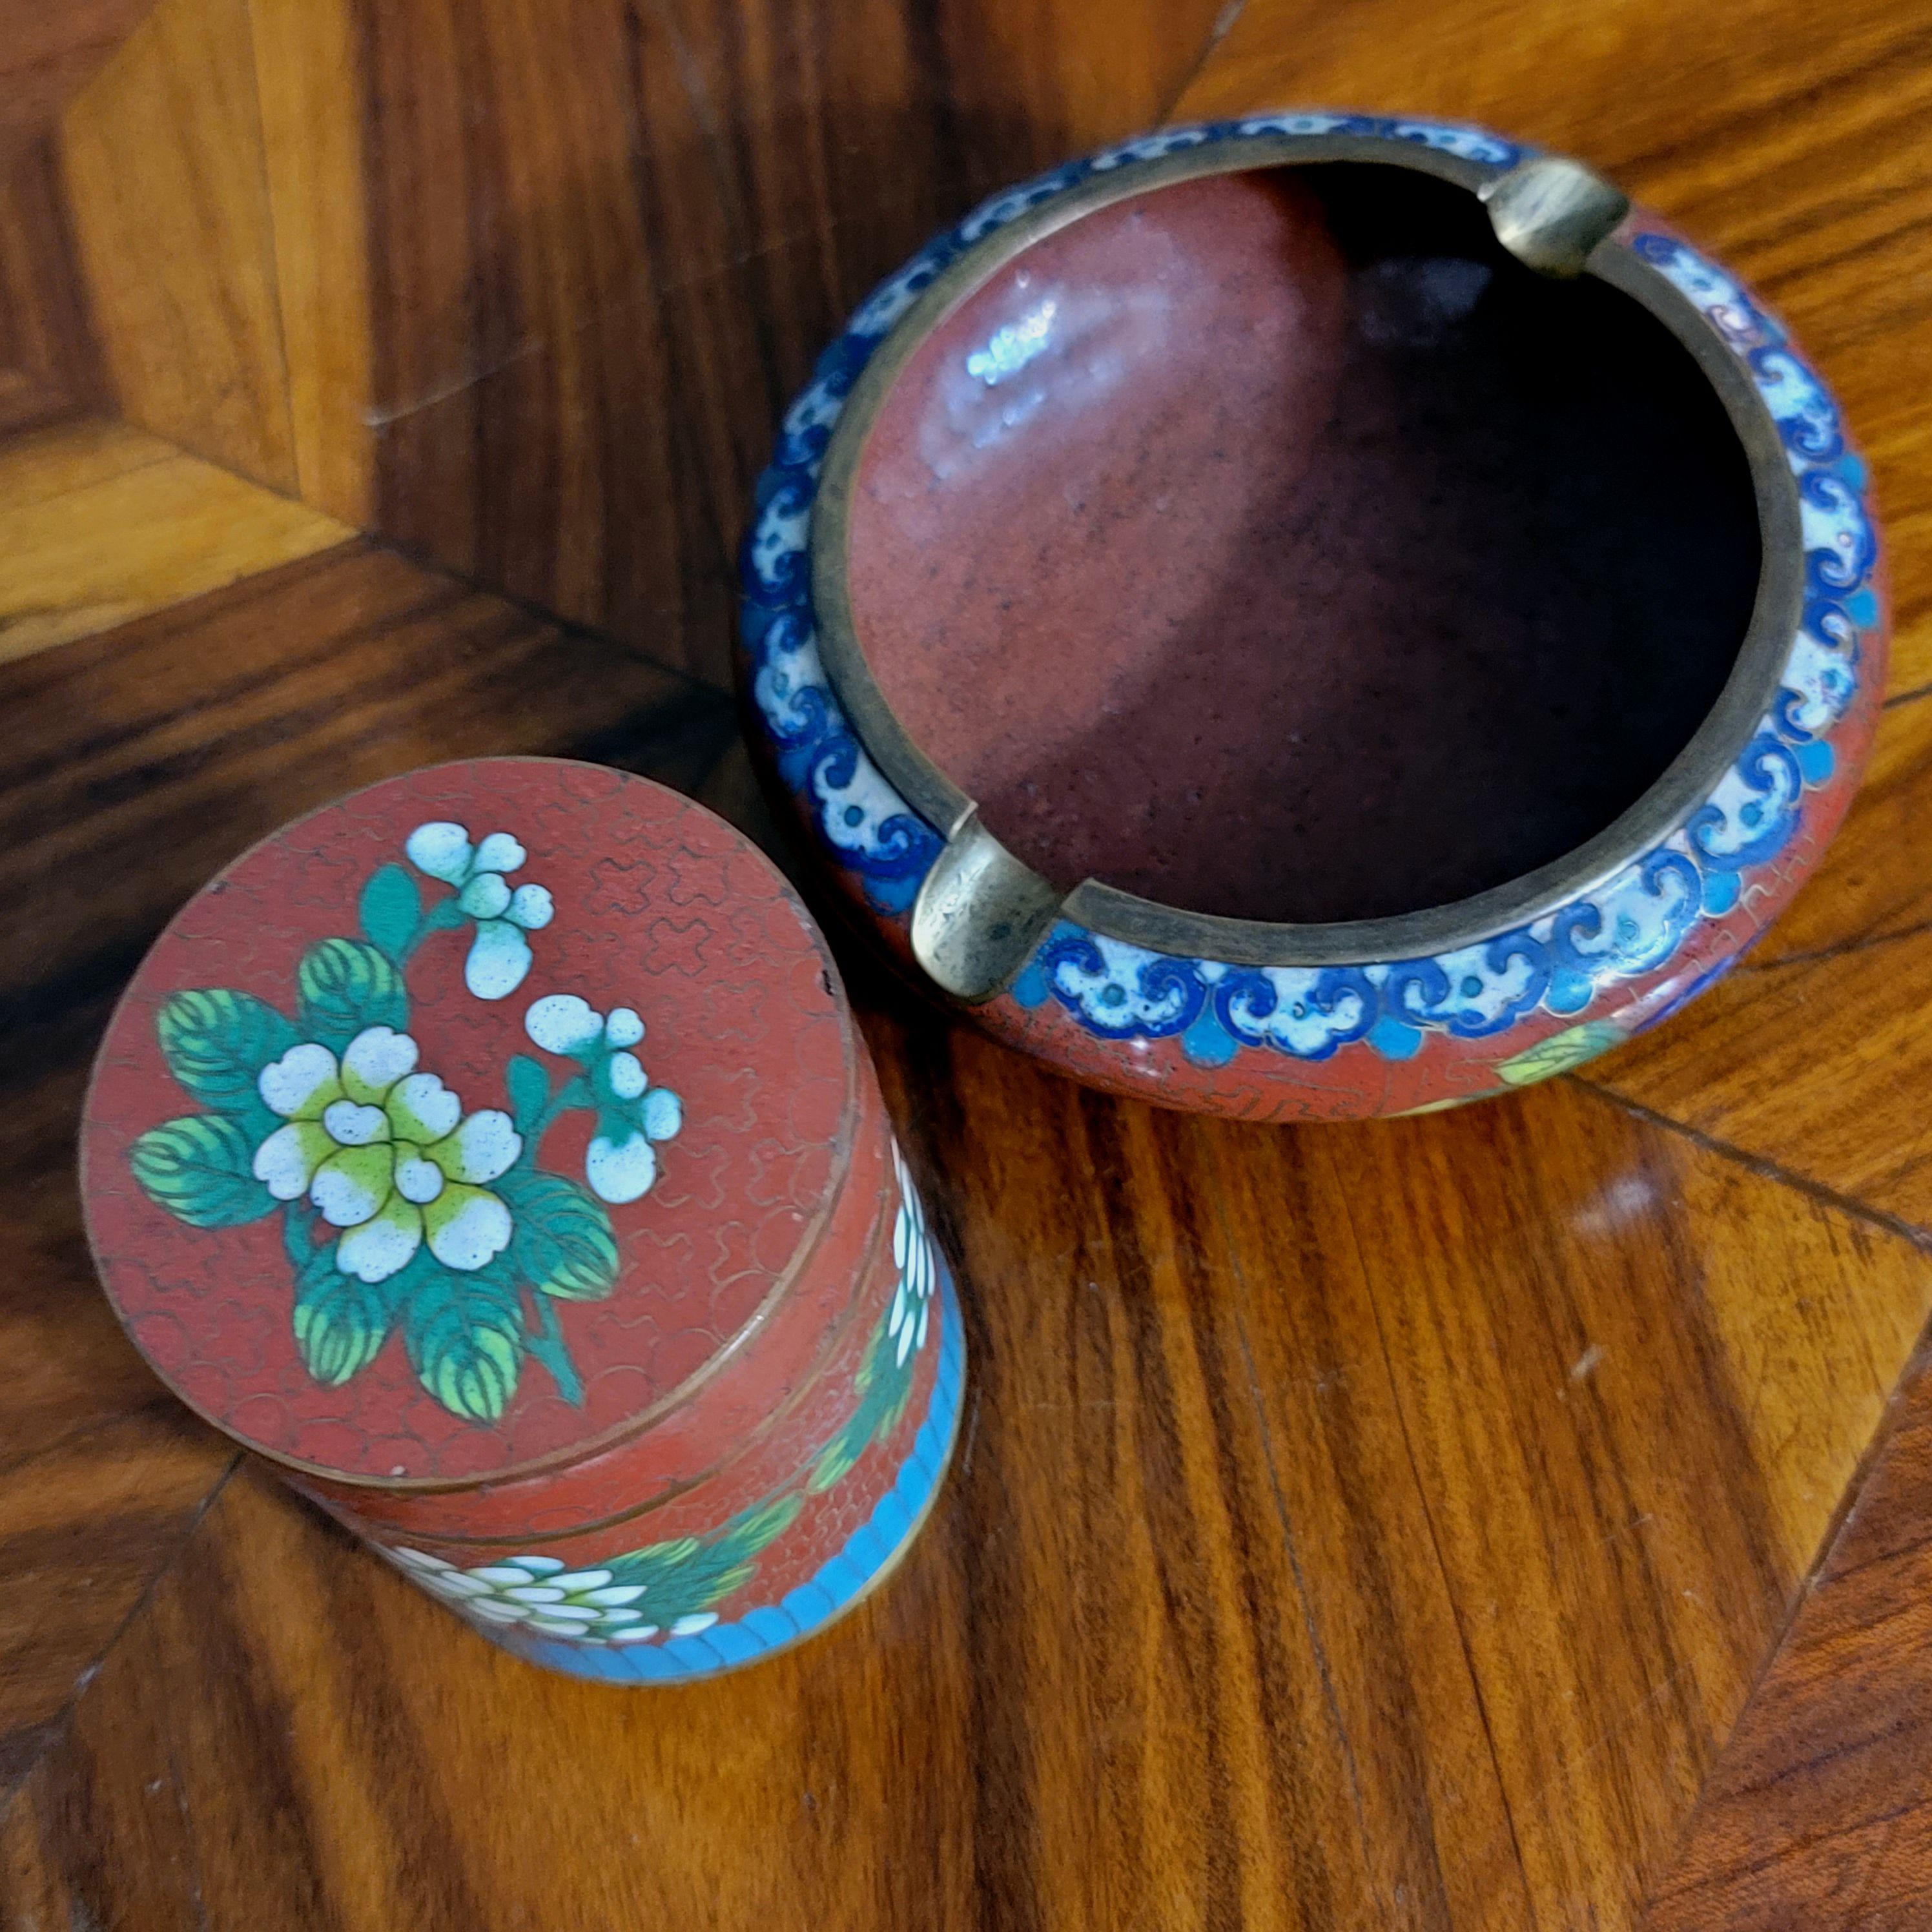 Chinese Matching Cloisonné Enamel Cigarette Case, Match Slot and Ashtray, 19c In Good Condition For Sale In Norton, MA